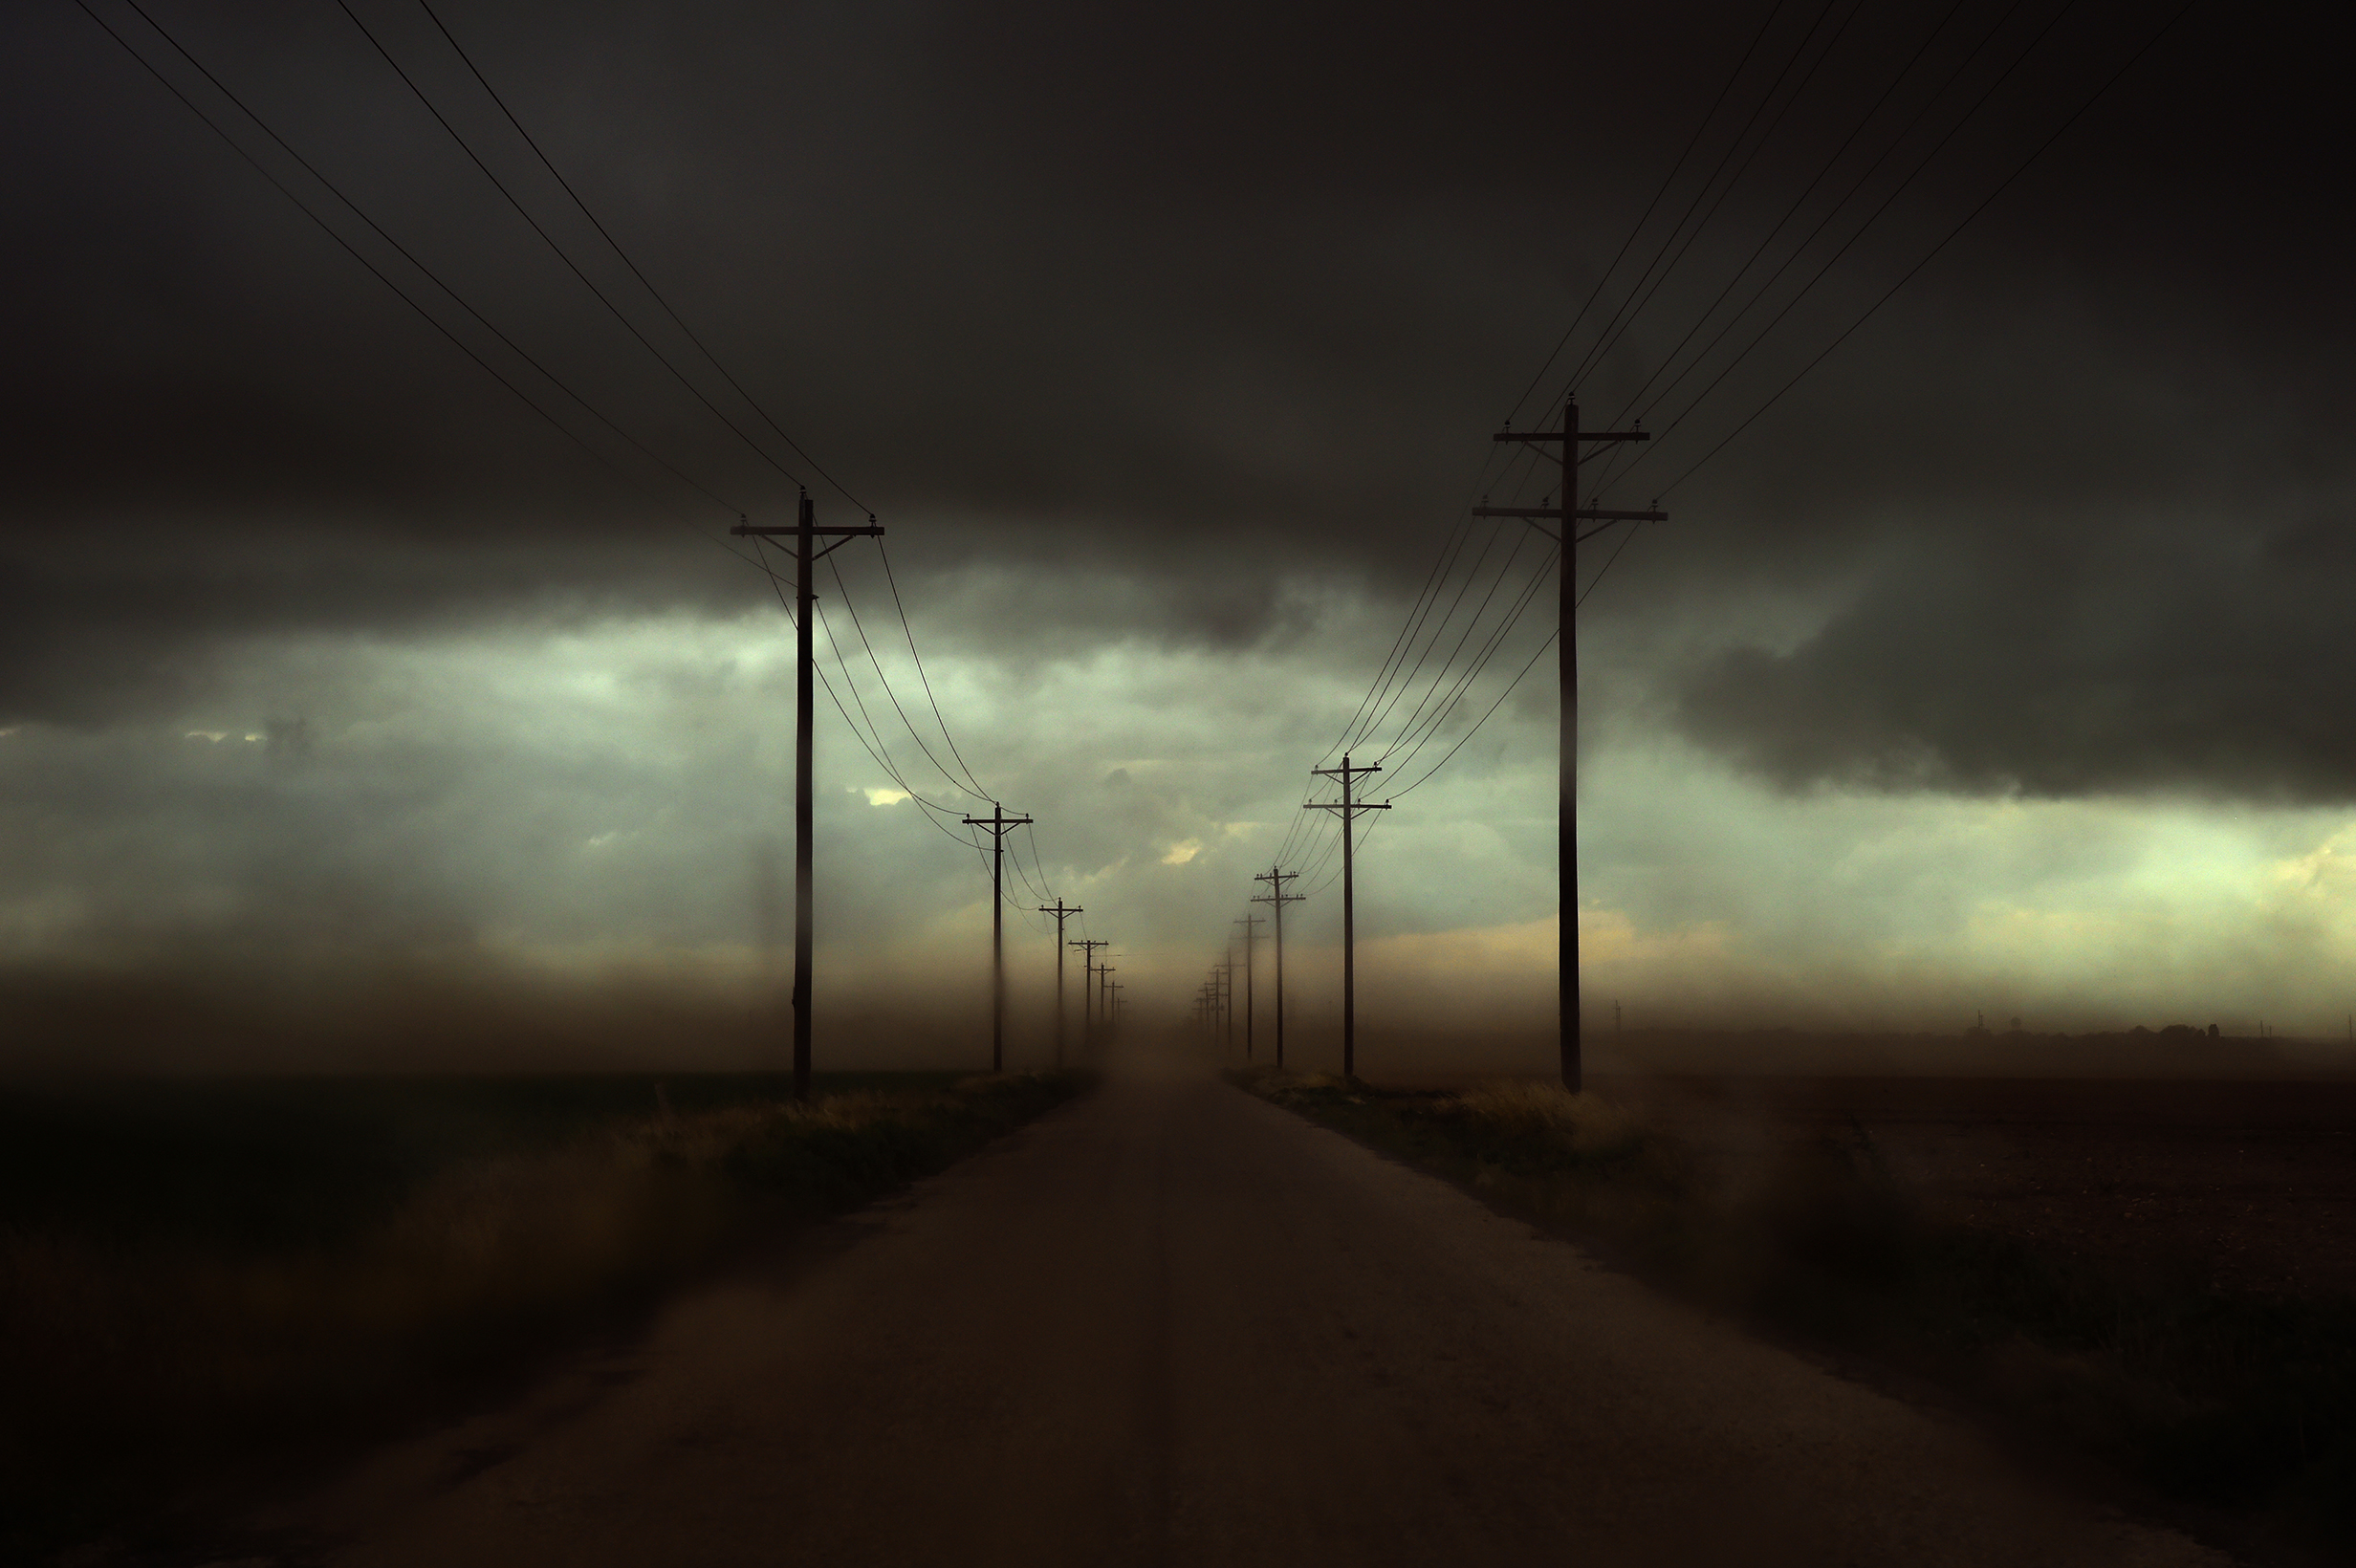 A photograph looking down a road lined with electricity poles - the air is coloured grey and yellow by particles in the air.